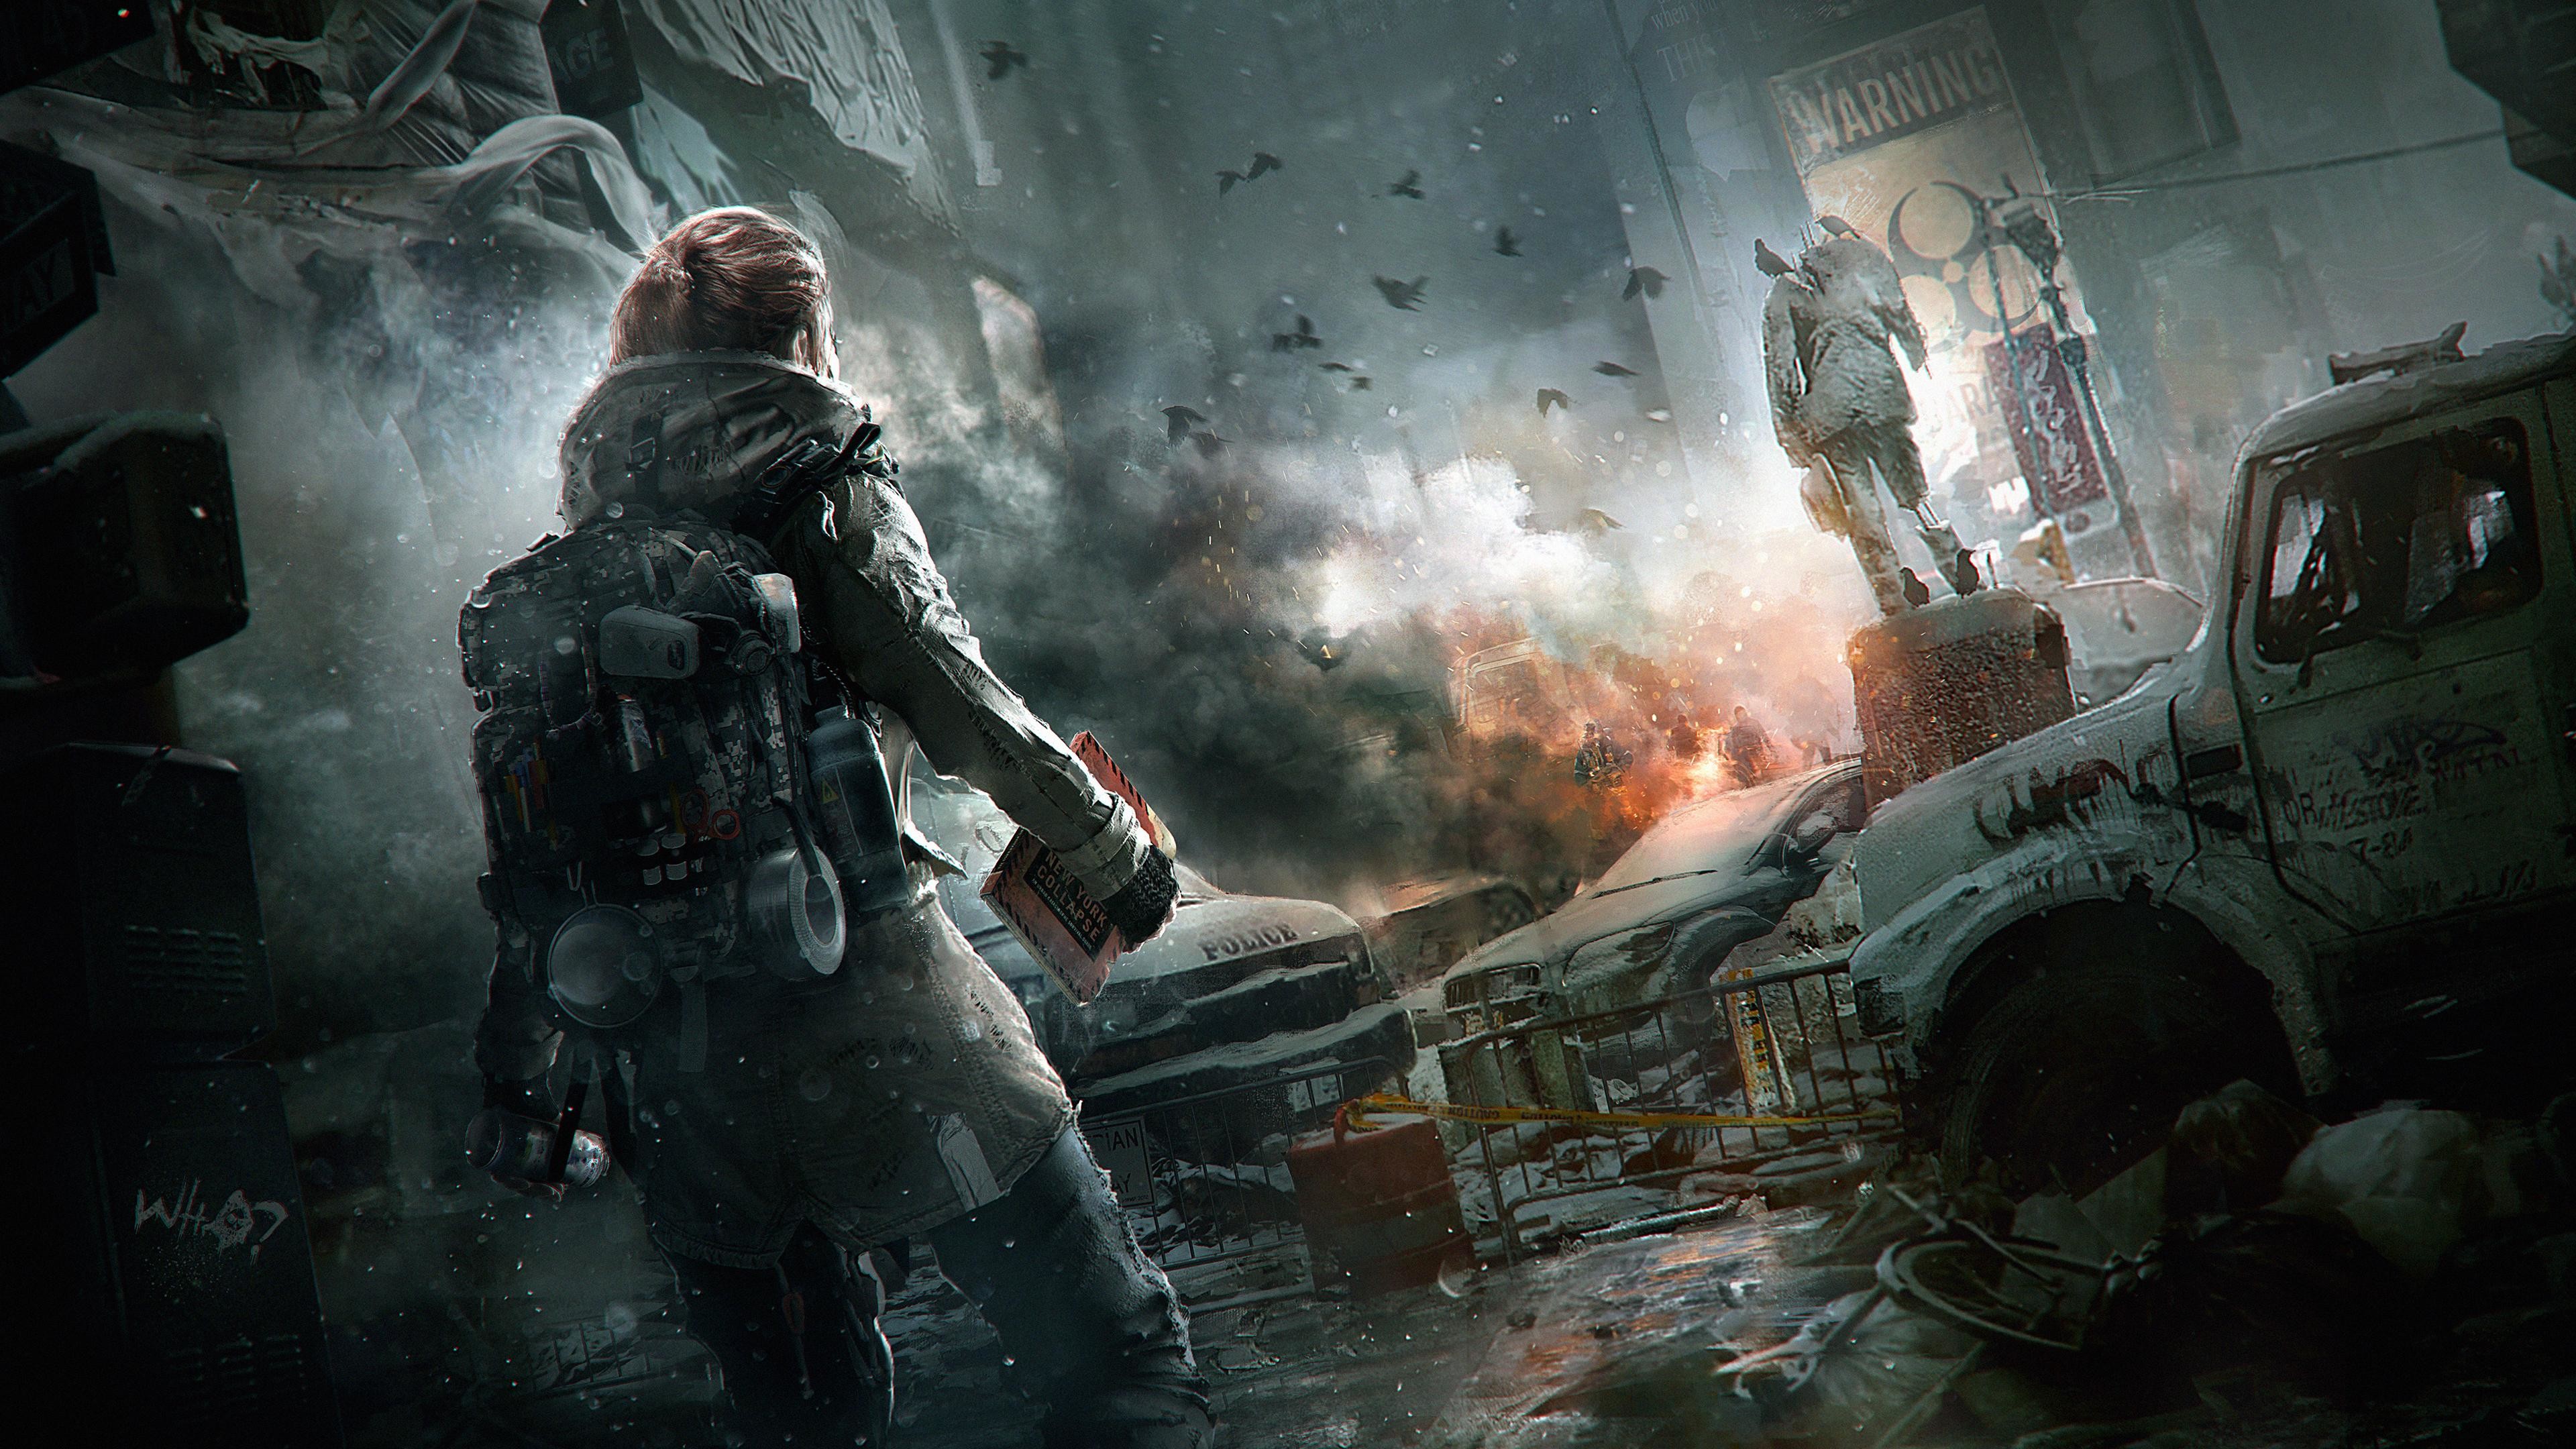 3840x2160 1920x1080 Tom Clancy\u0027s The Division HD Wallpapers 9 - 1920 X 1080 |  stmed.net